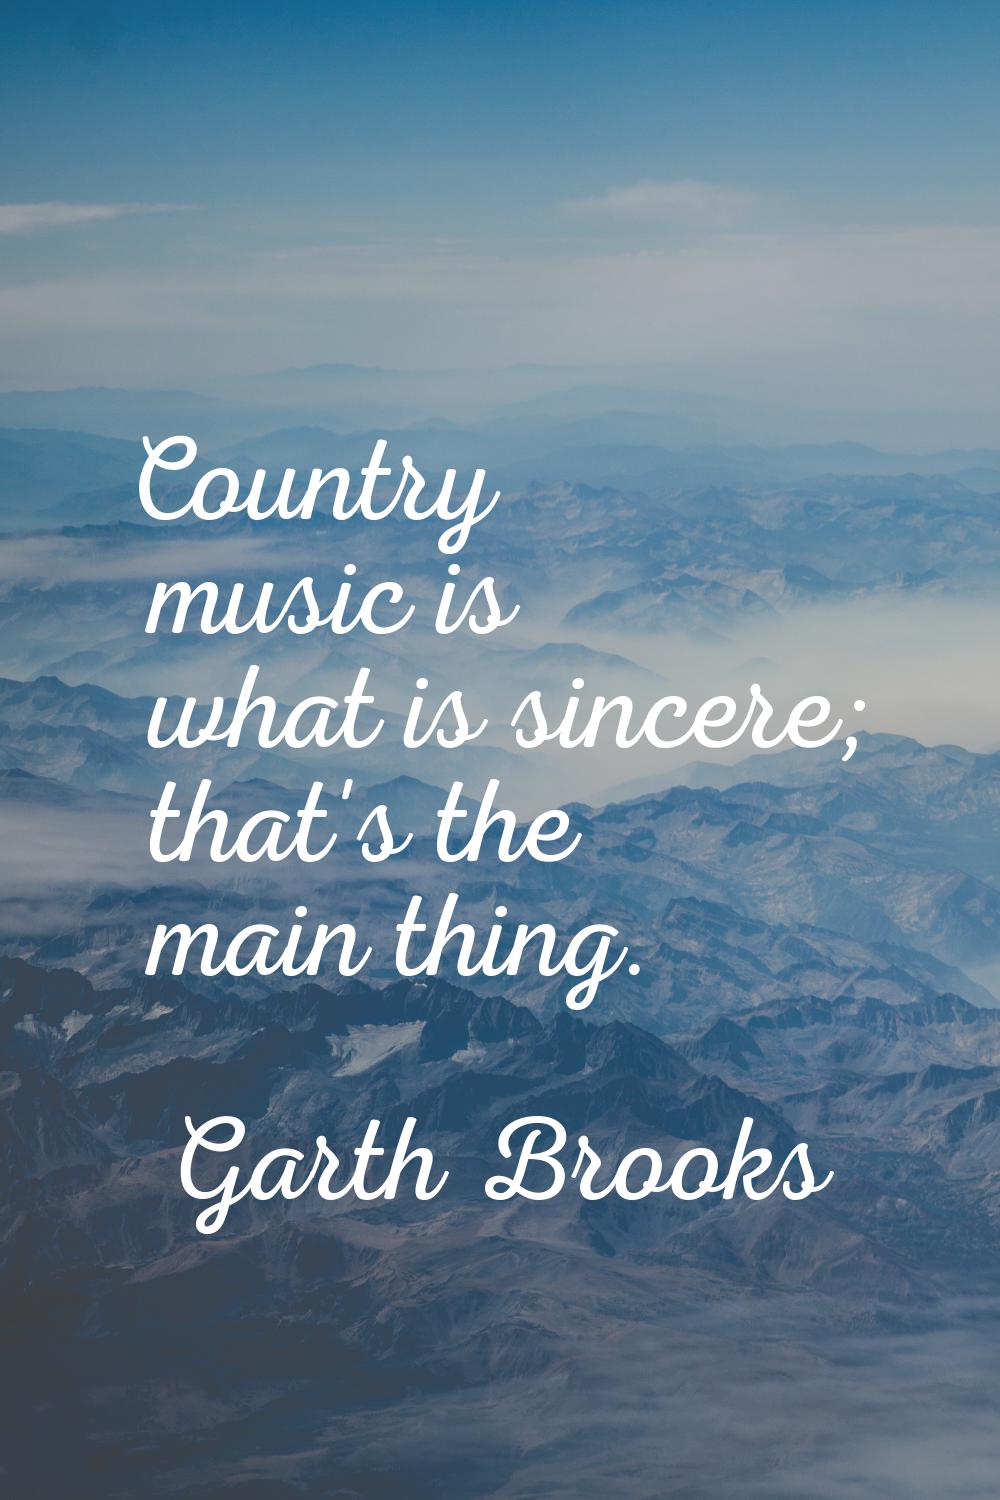 Country music is what is sincere; that's the main thing.